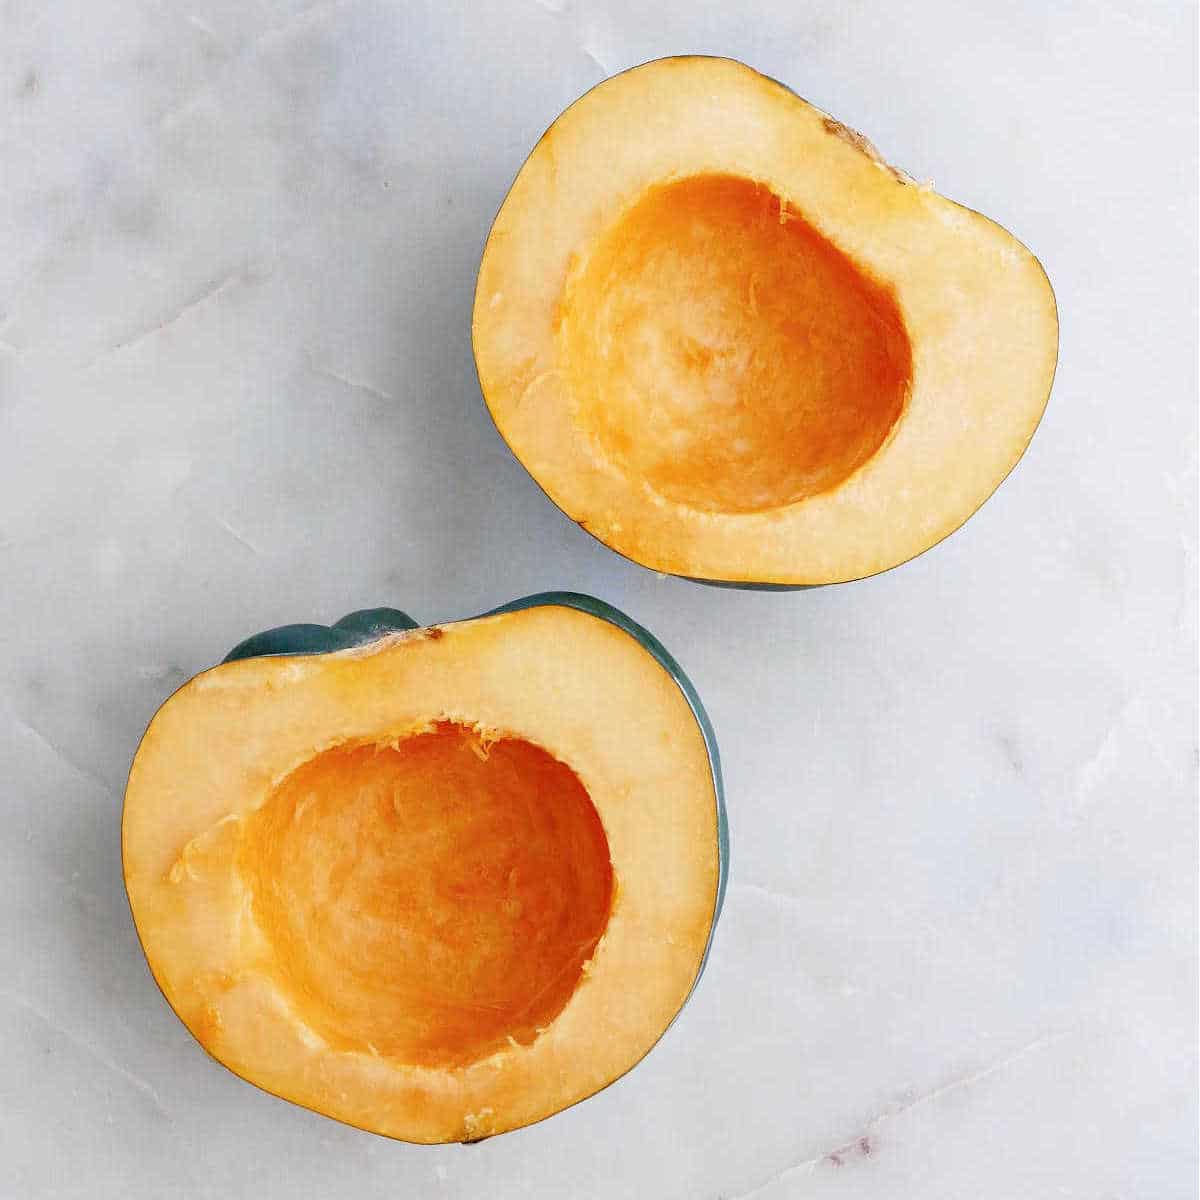 halved and deseeded acorn squash halves on a counter